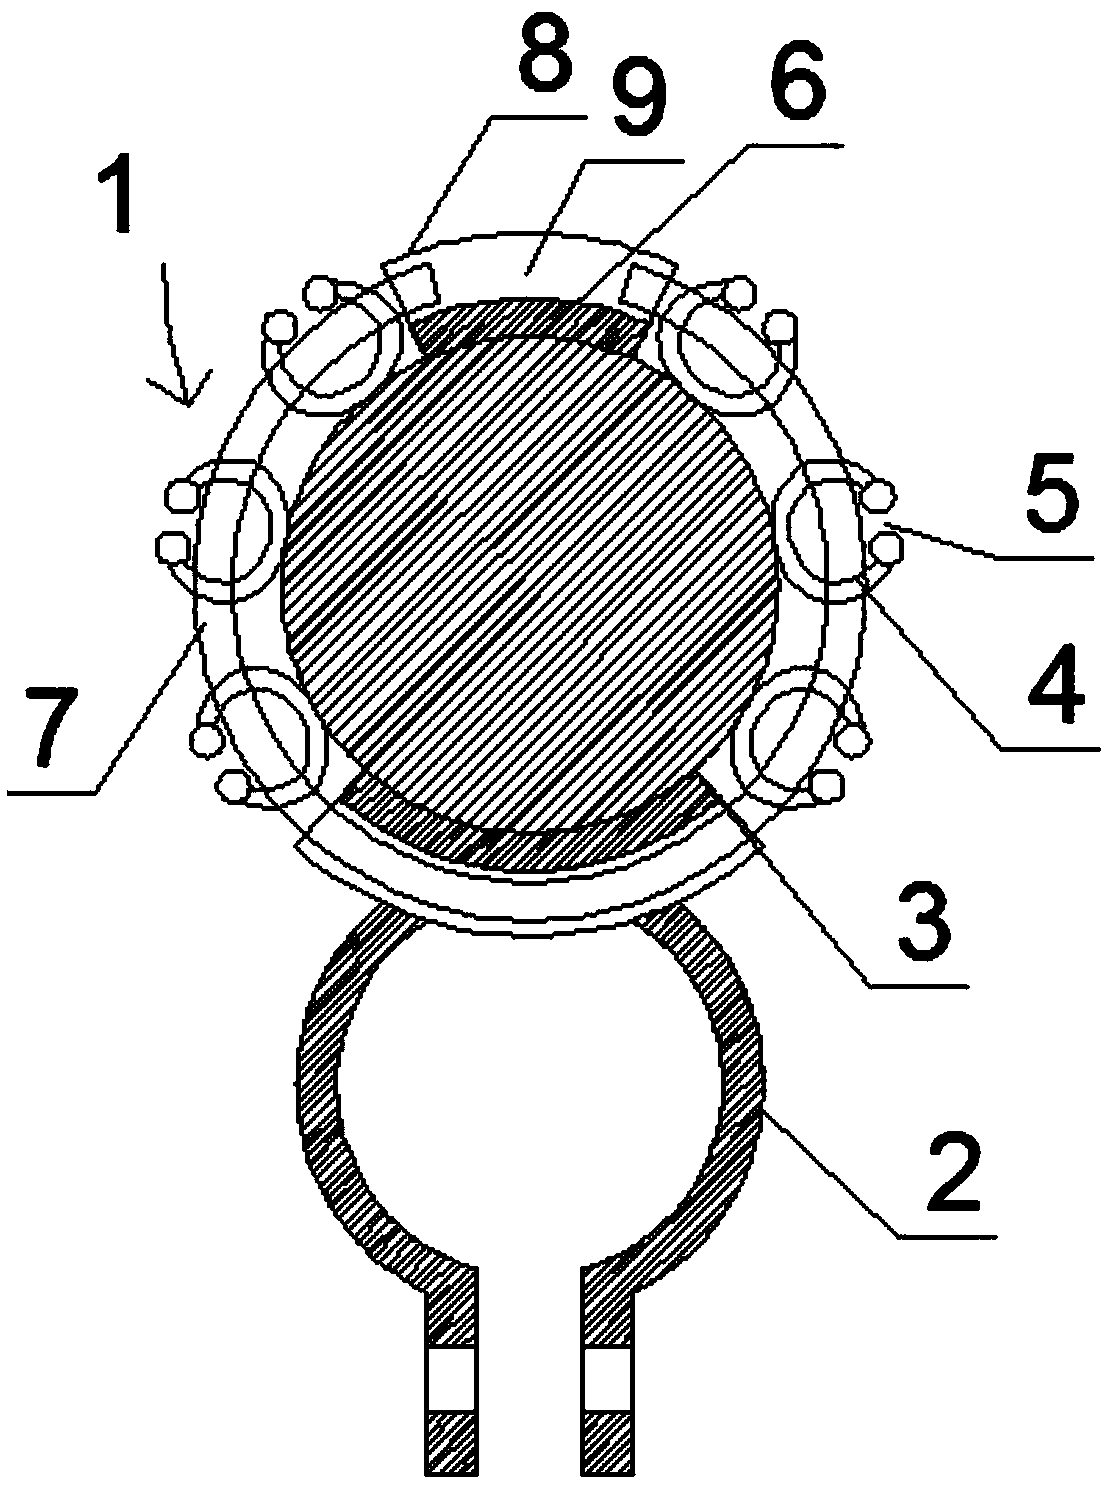 Electric vehicle cable fixing device